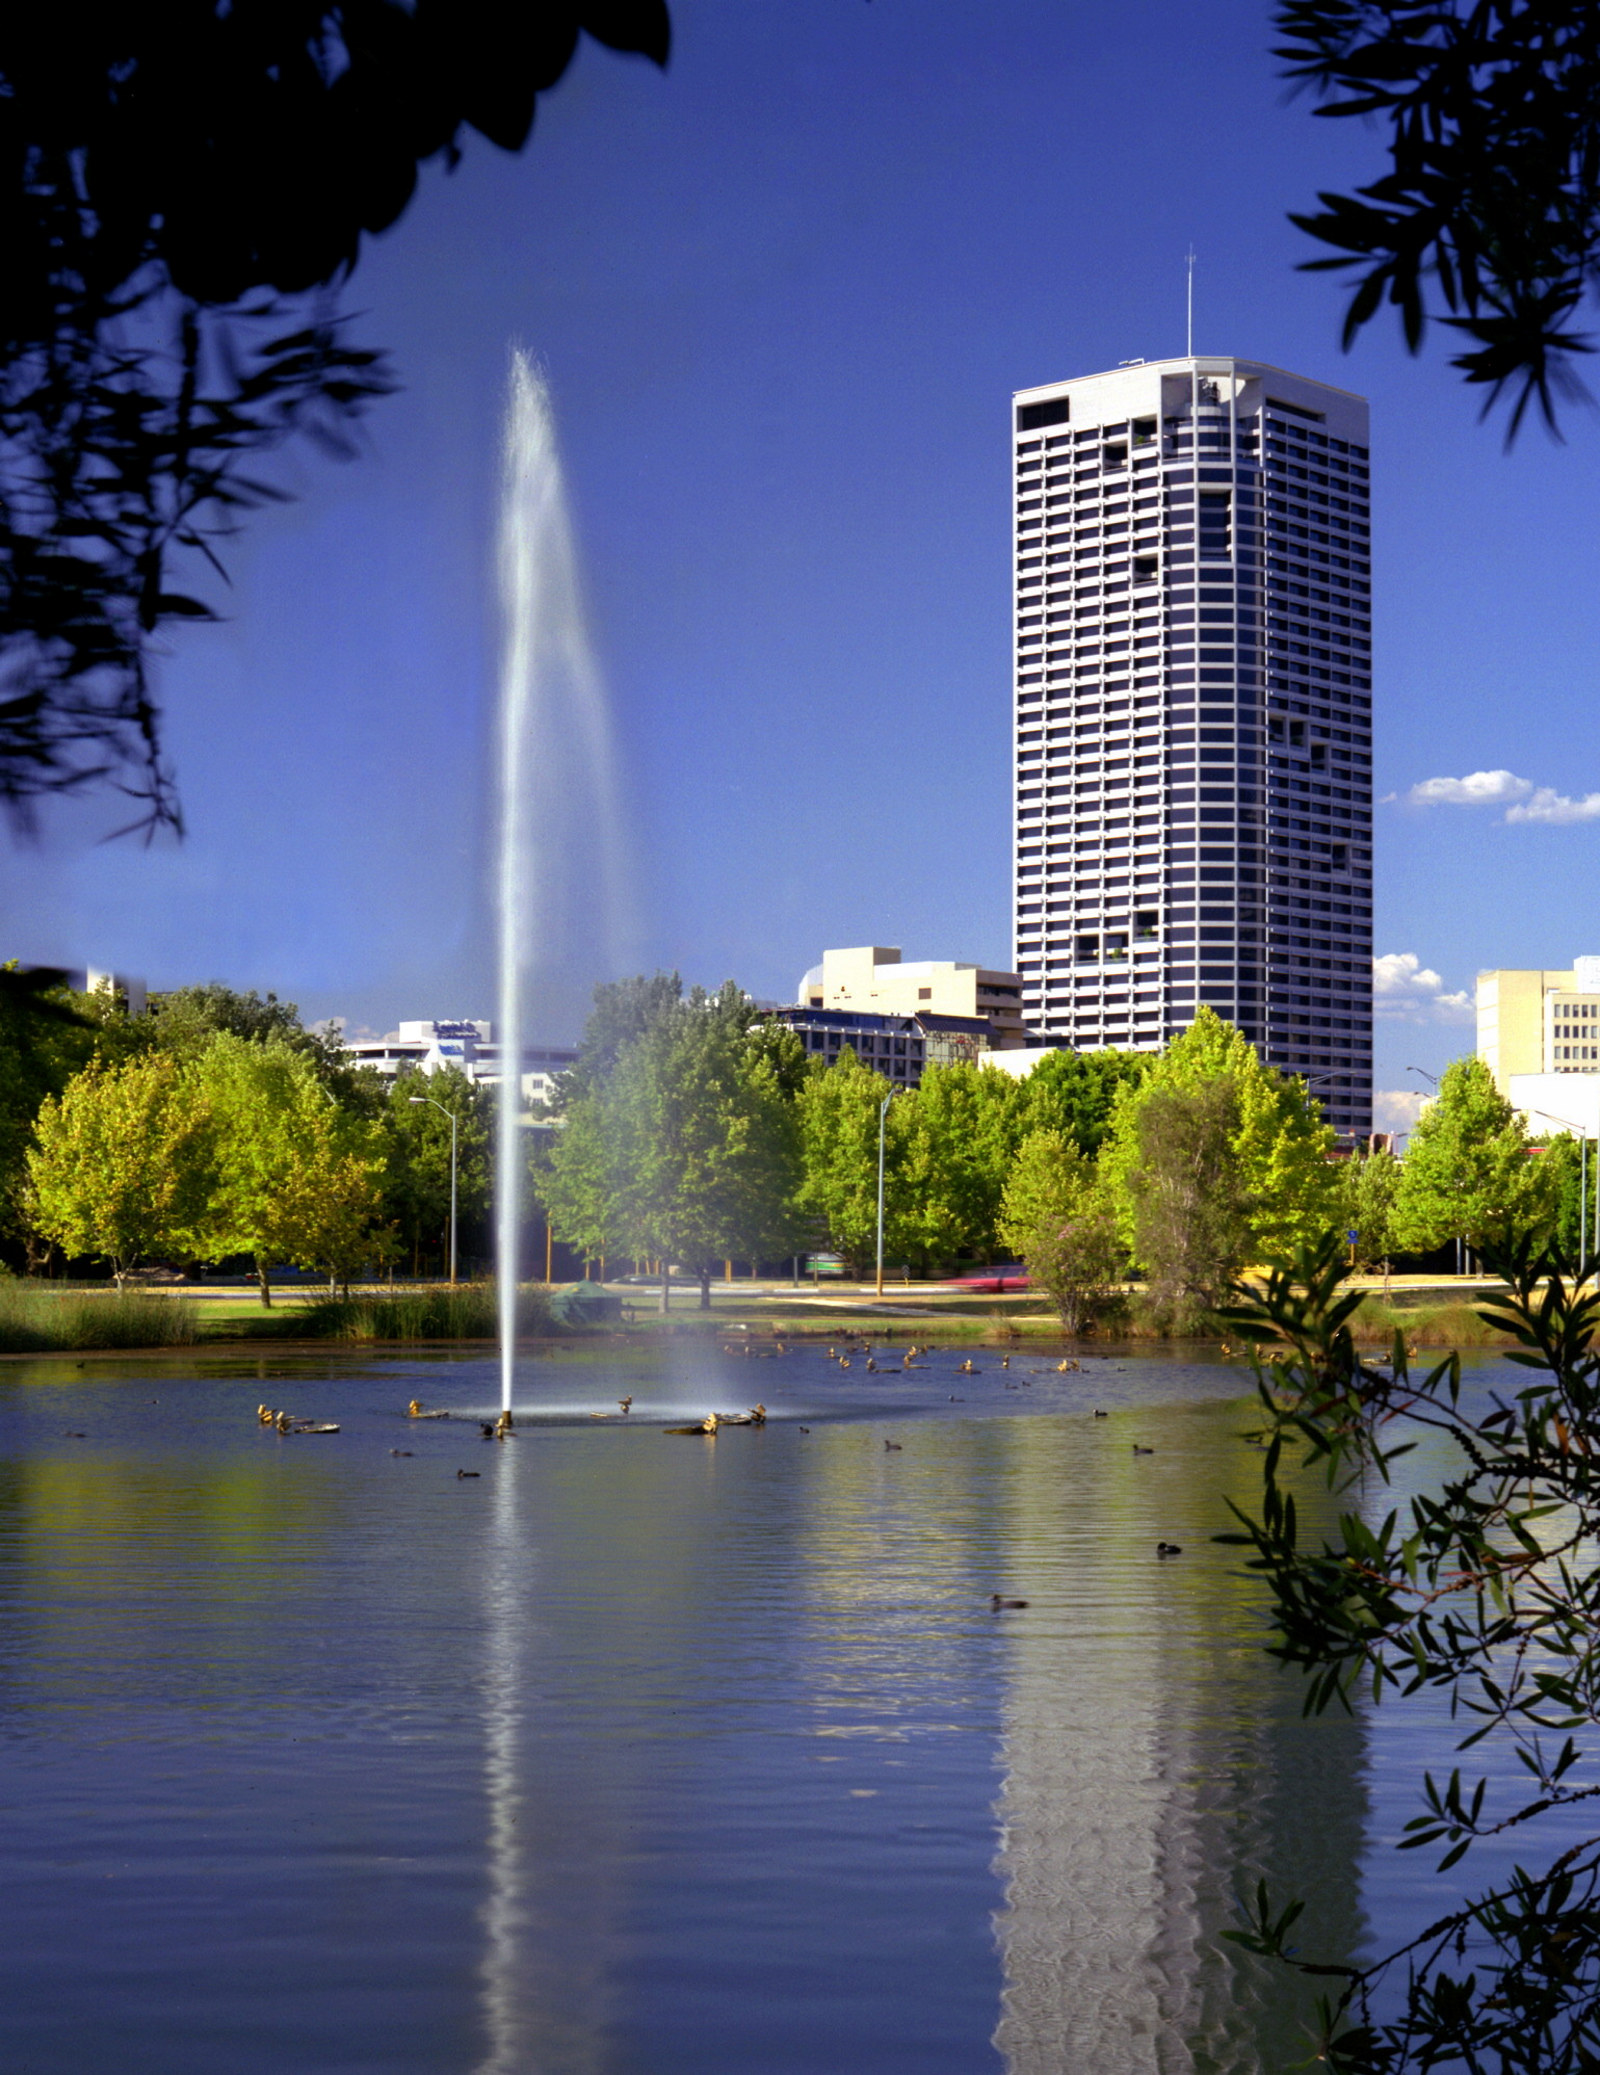 This is a colour photograph of an office tower with a wide river and fountain of water in the foreground